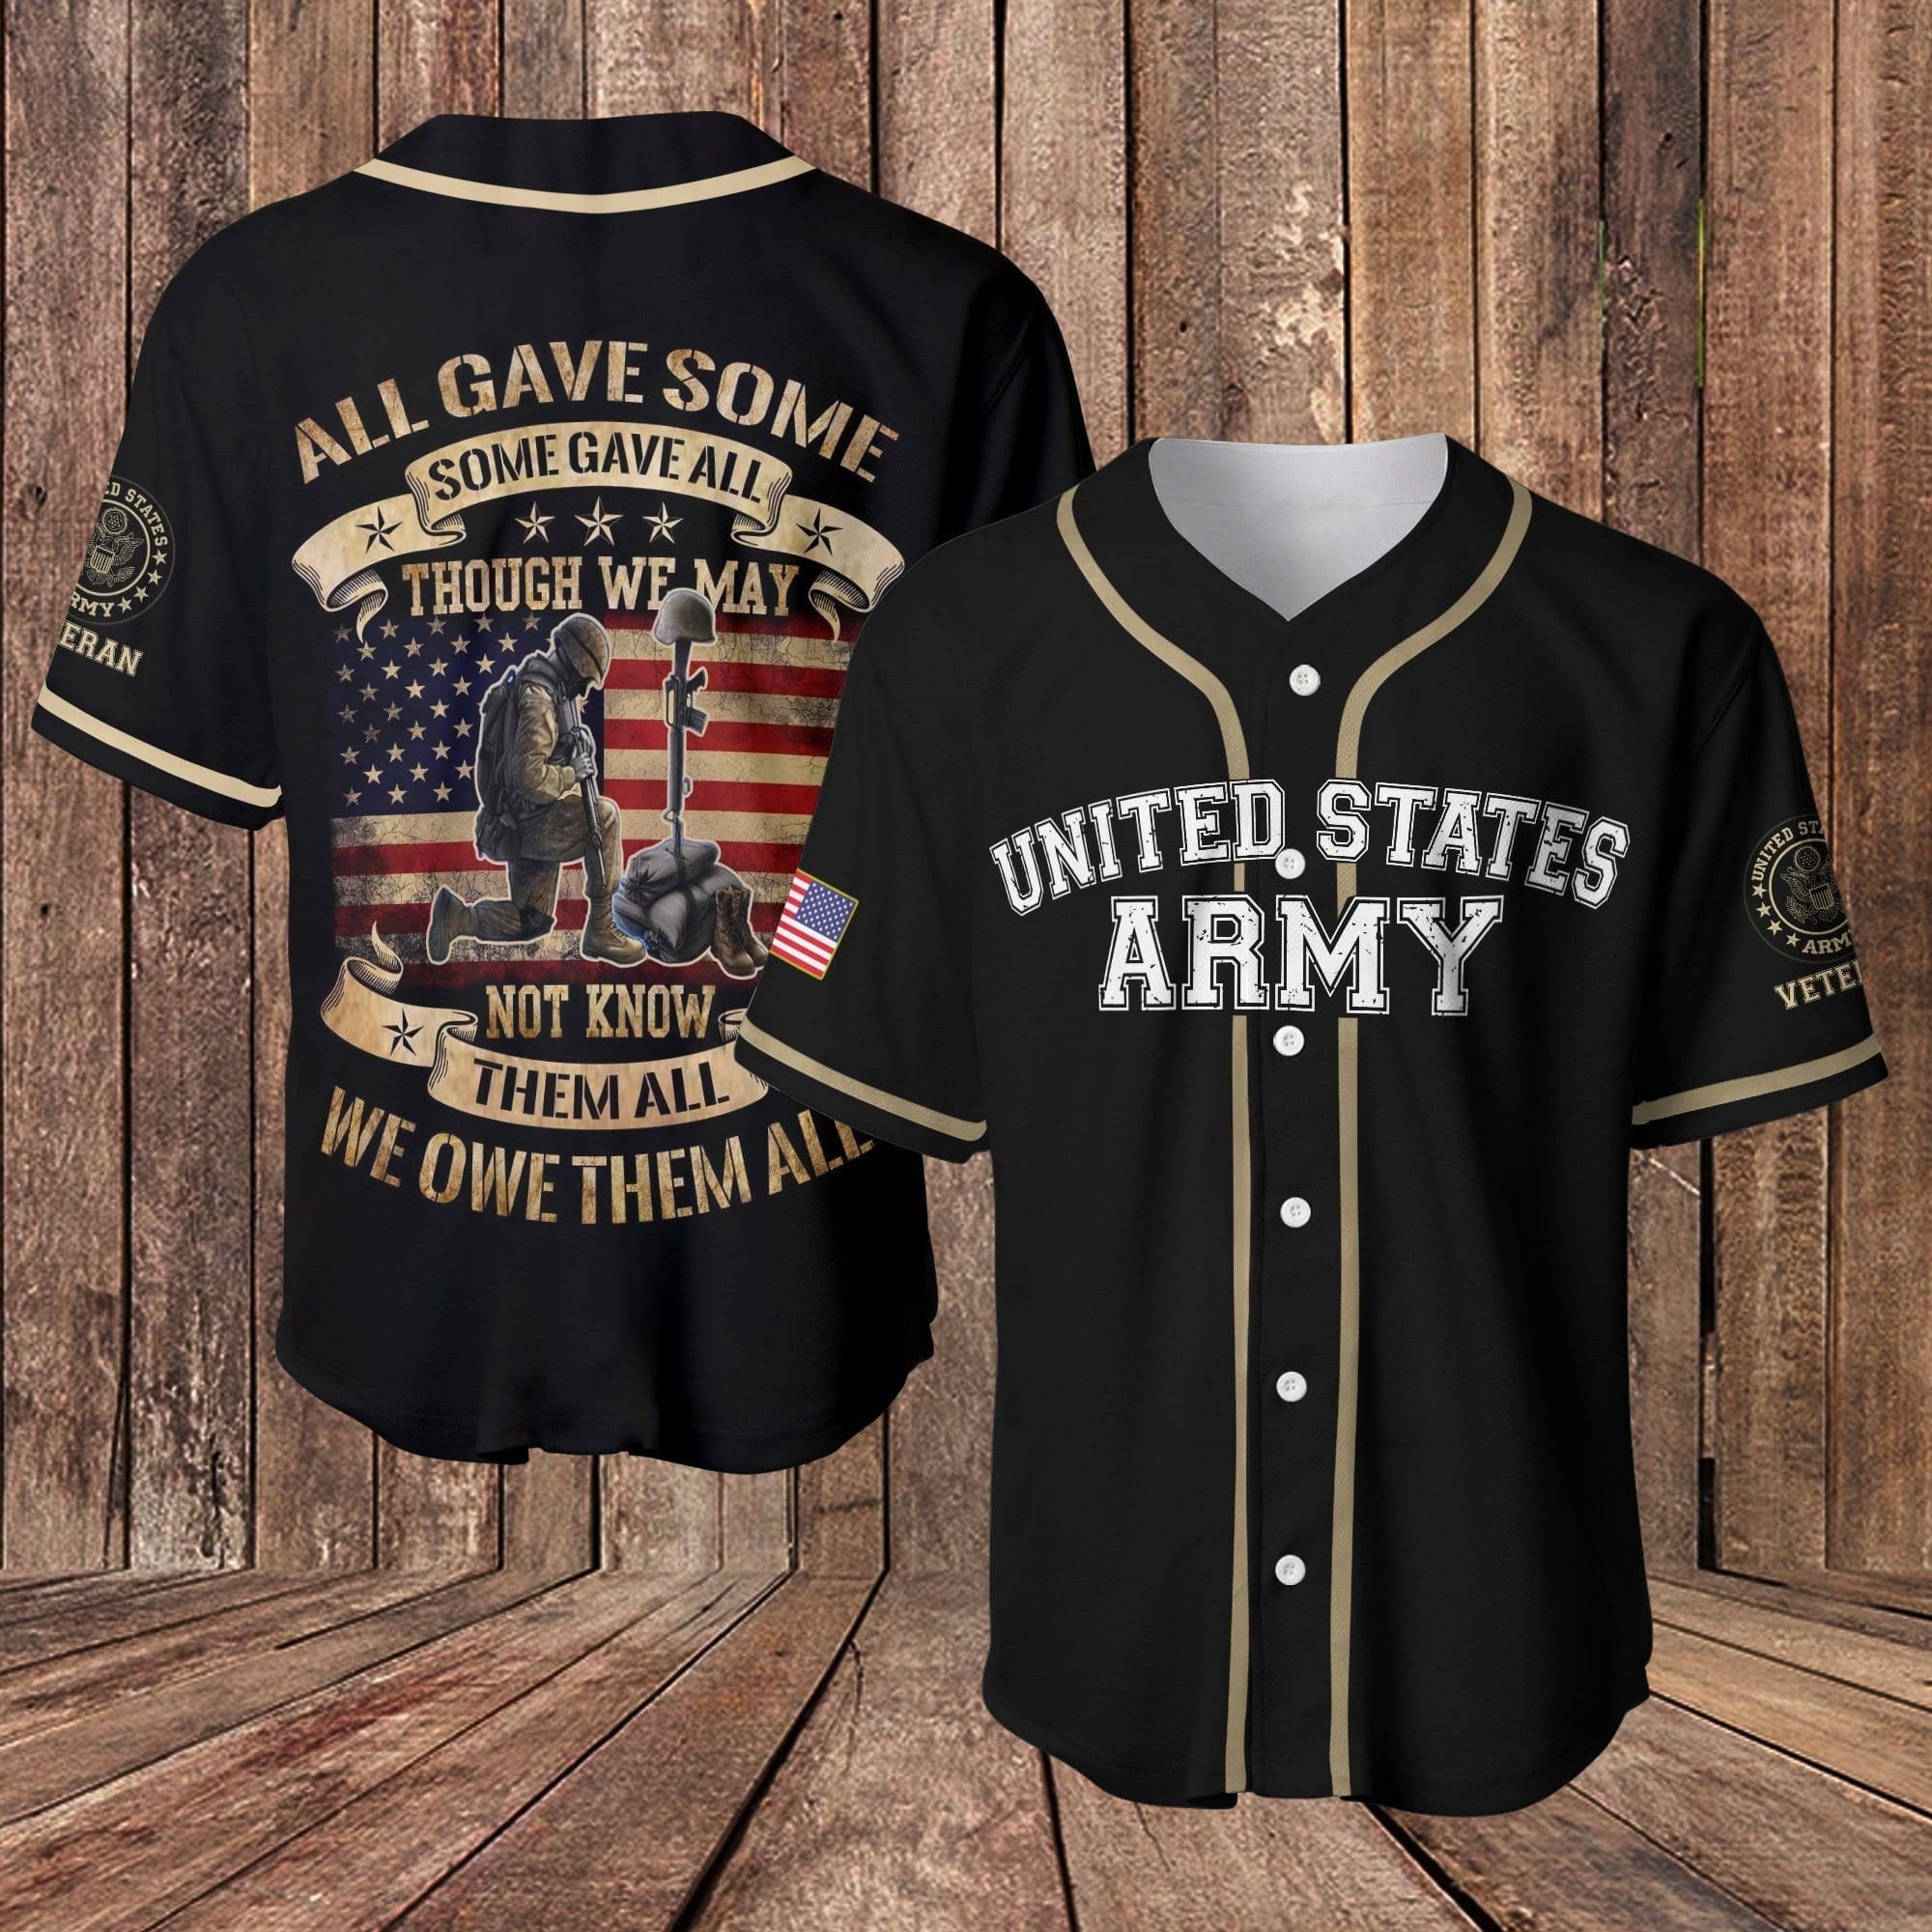 All Gave Some Some Gave All US Army Black Baseball Tee Jersey Shirt Printed 3D